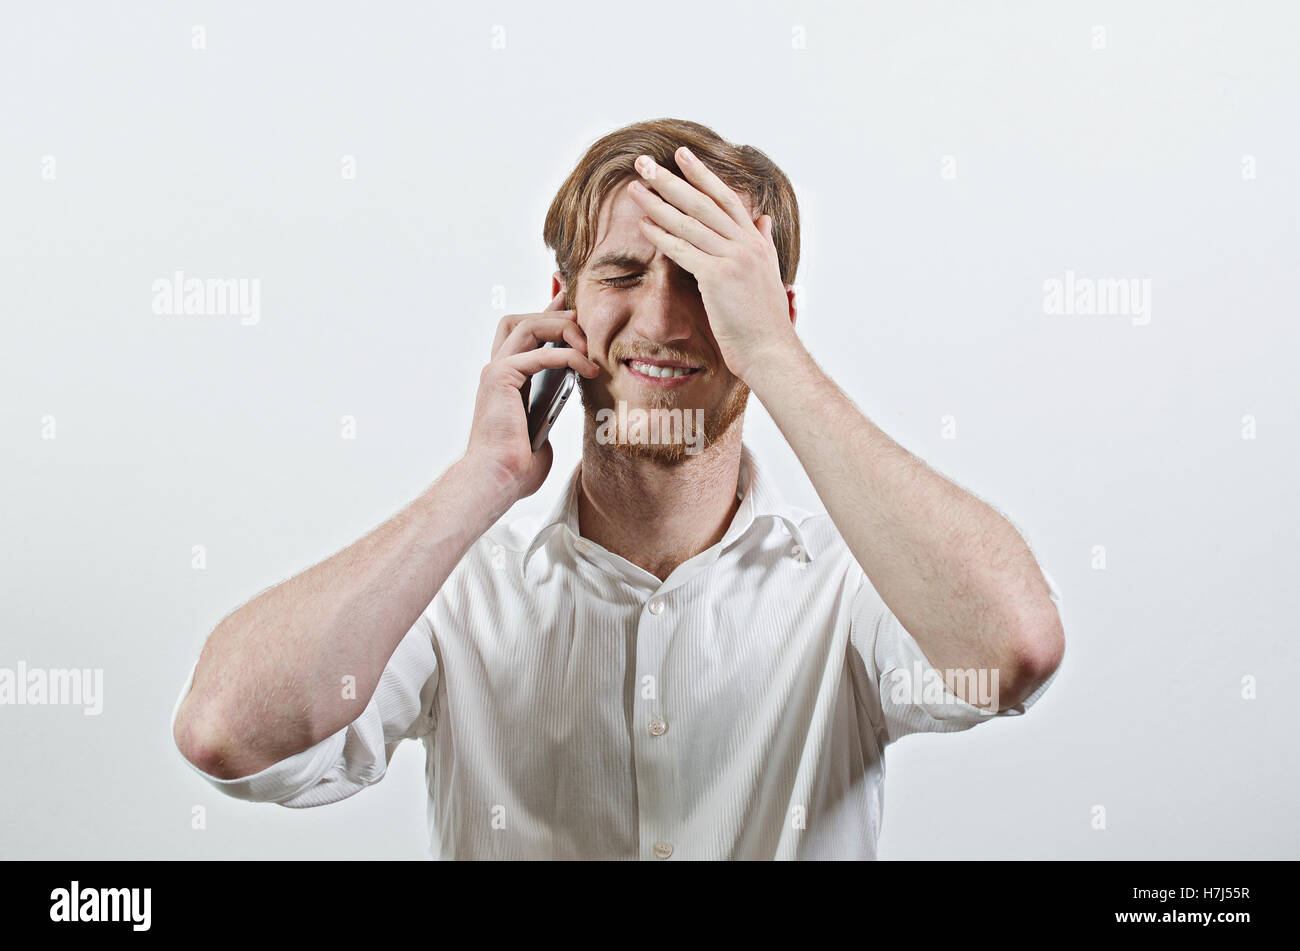 Young Adult Man in White Shirt Listening to His Phone, Holding His Head in Hands, Receiving Bad News Stock Photo